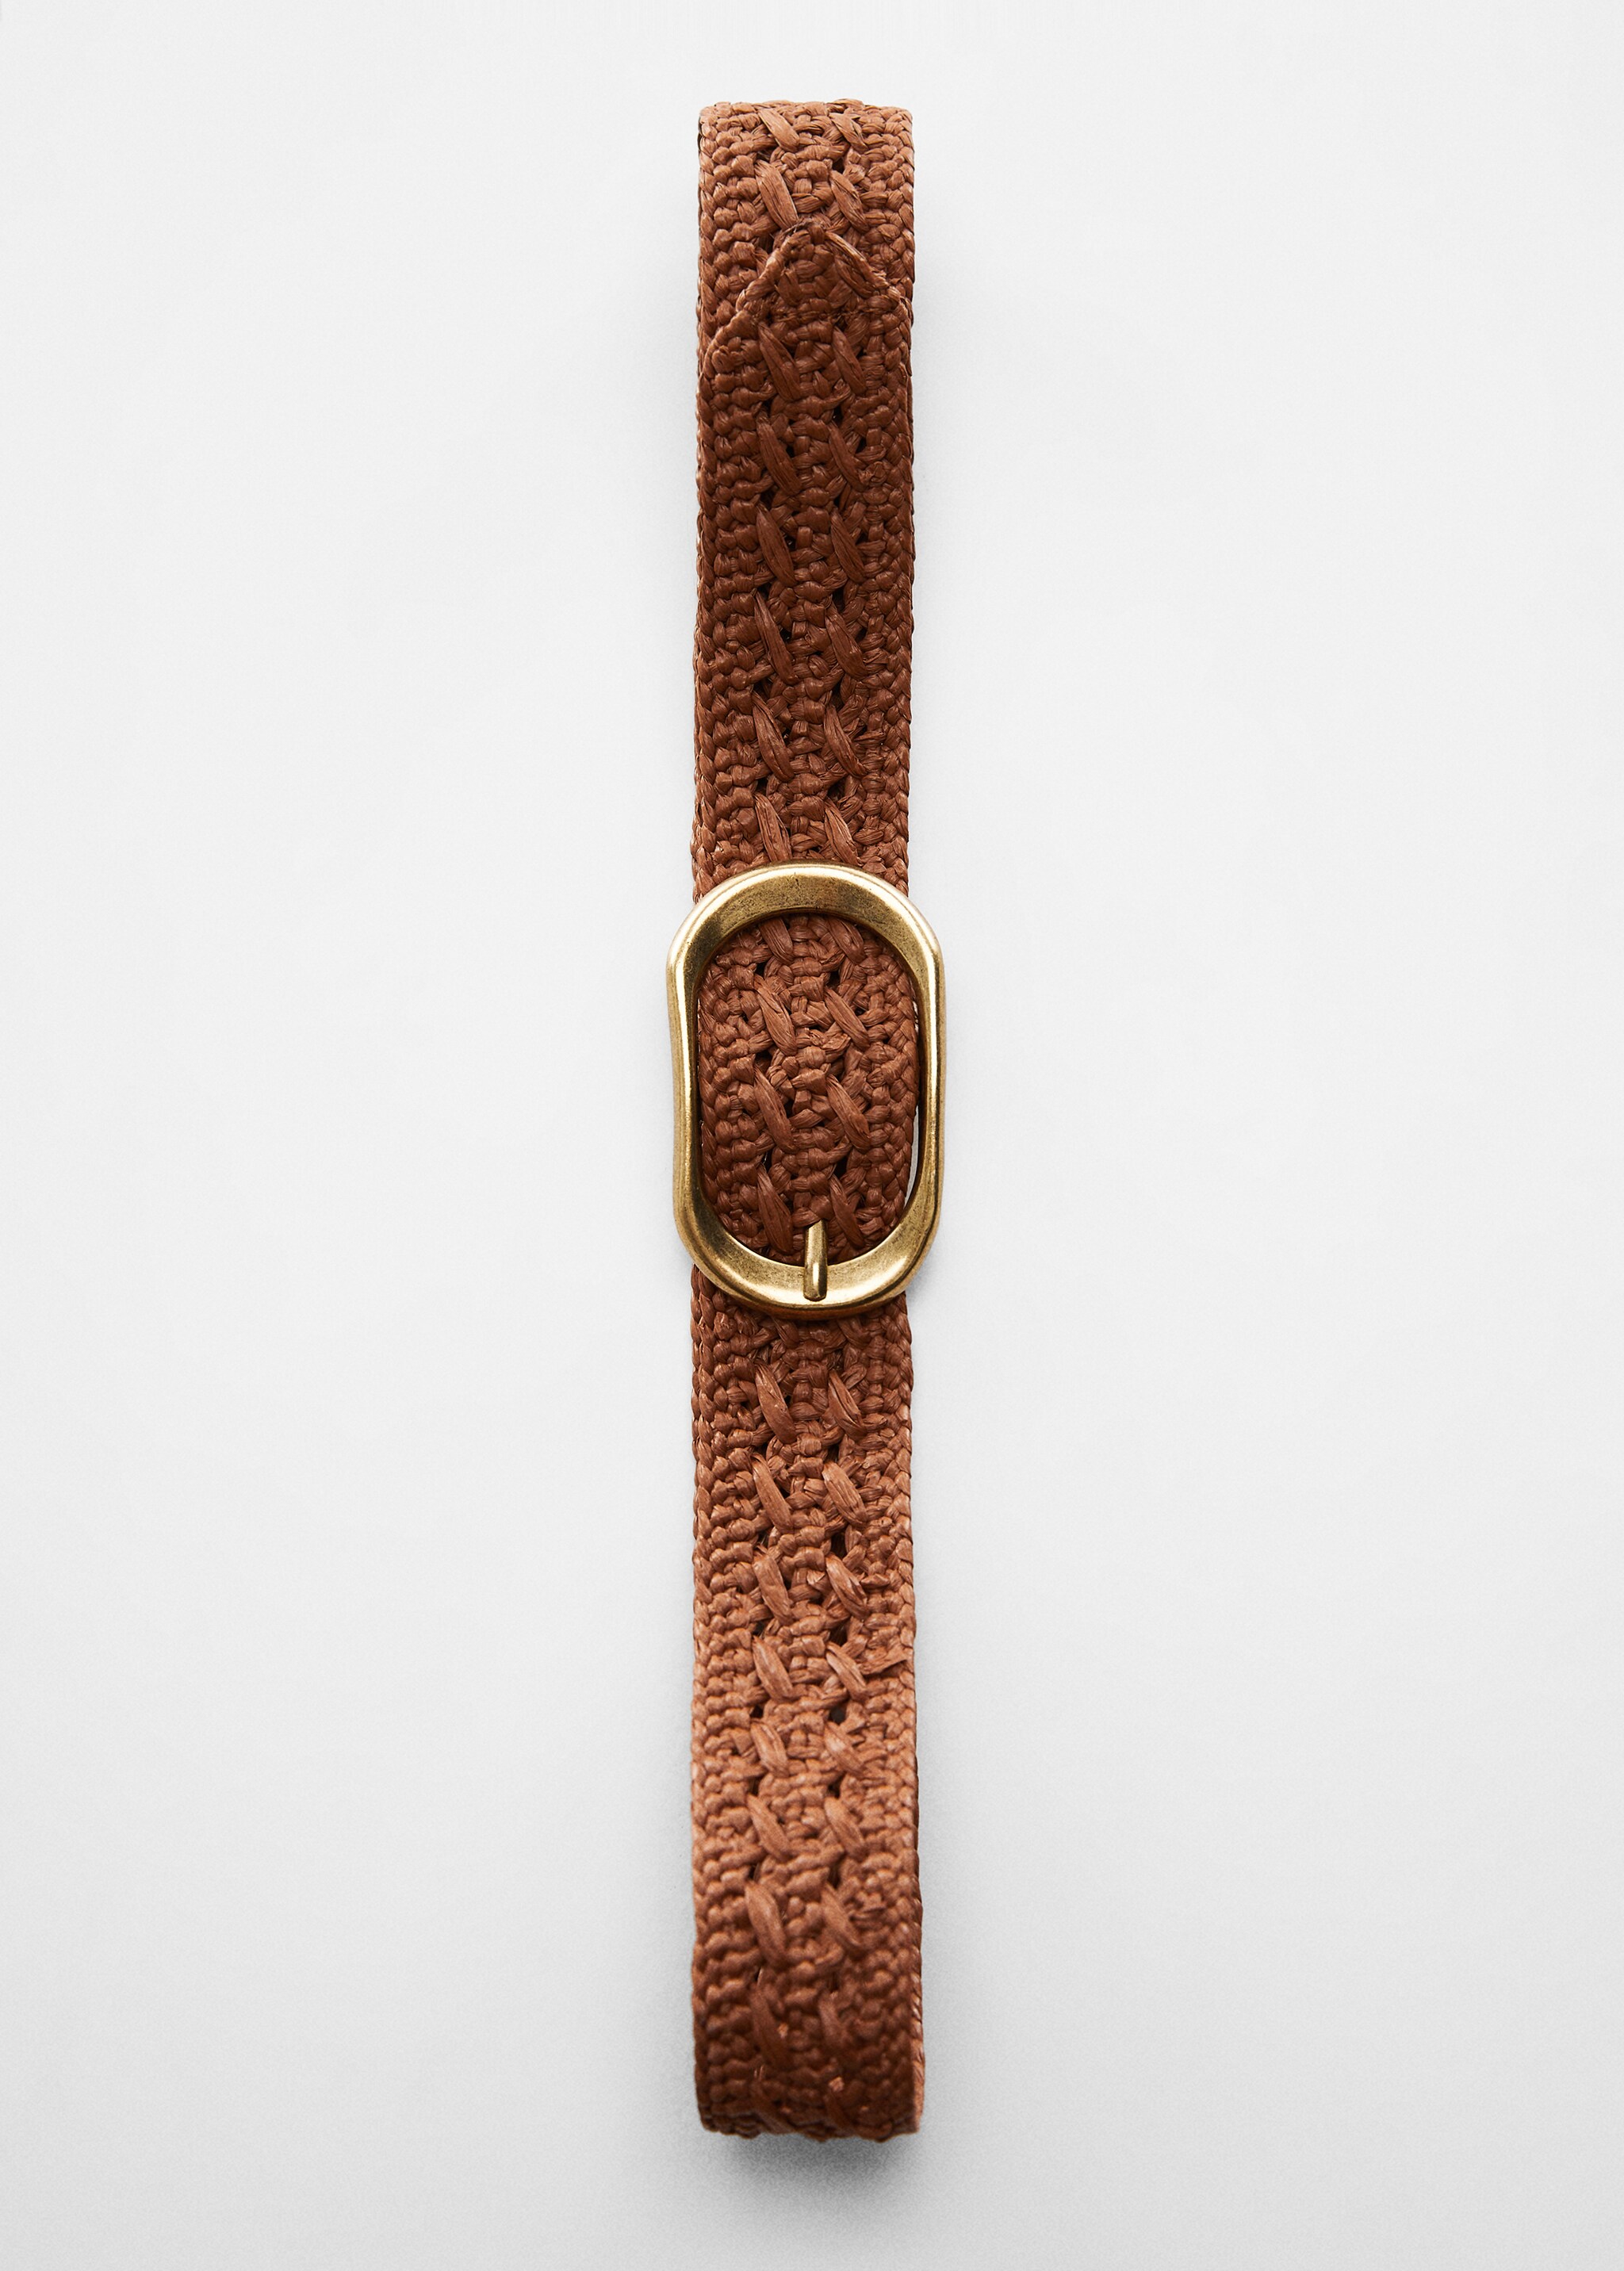 Crochet belt with buckle - Details of the article 5